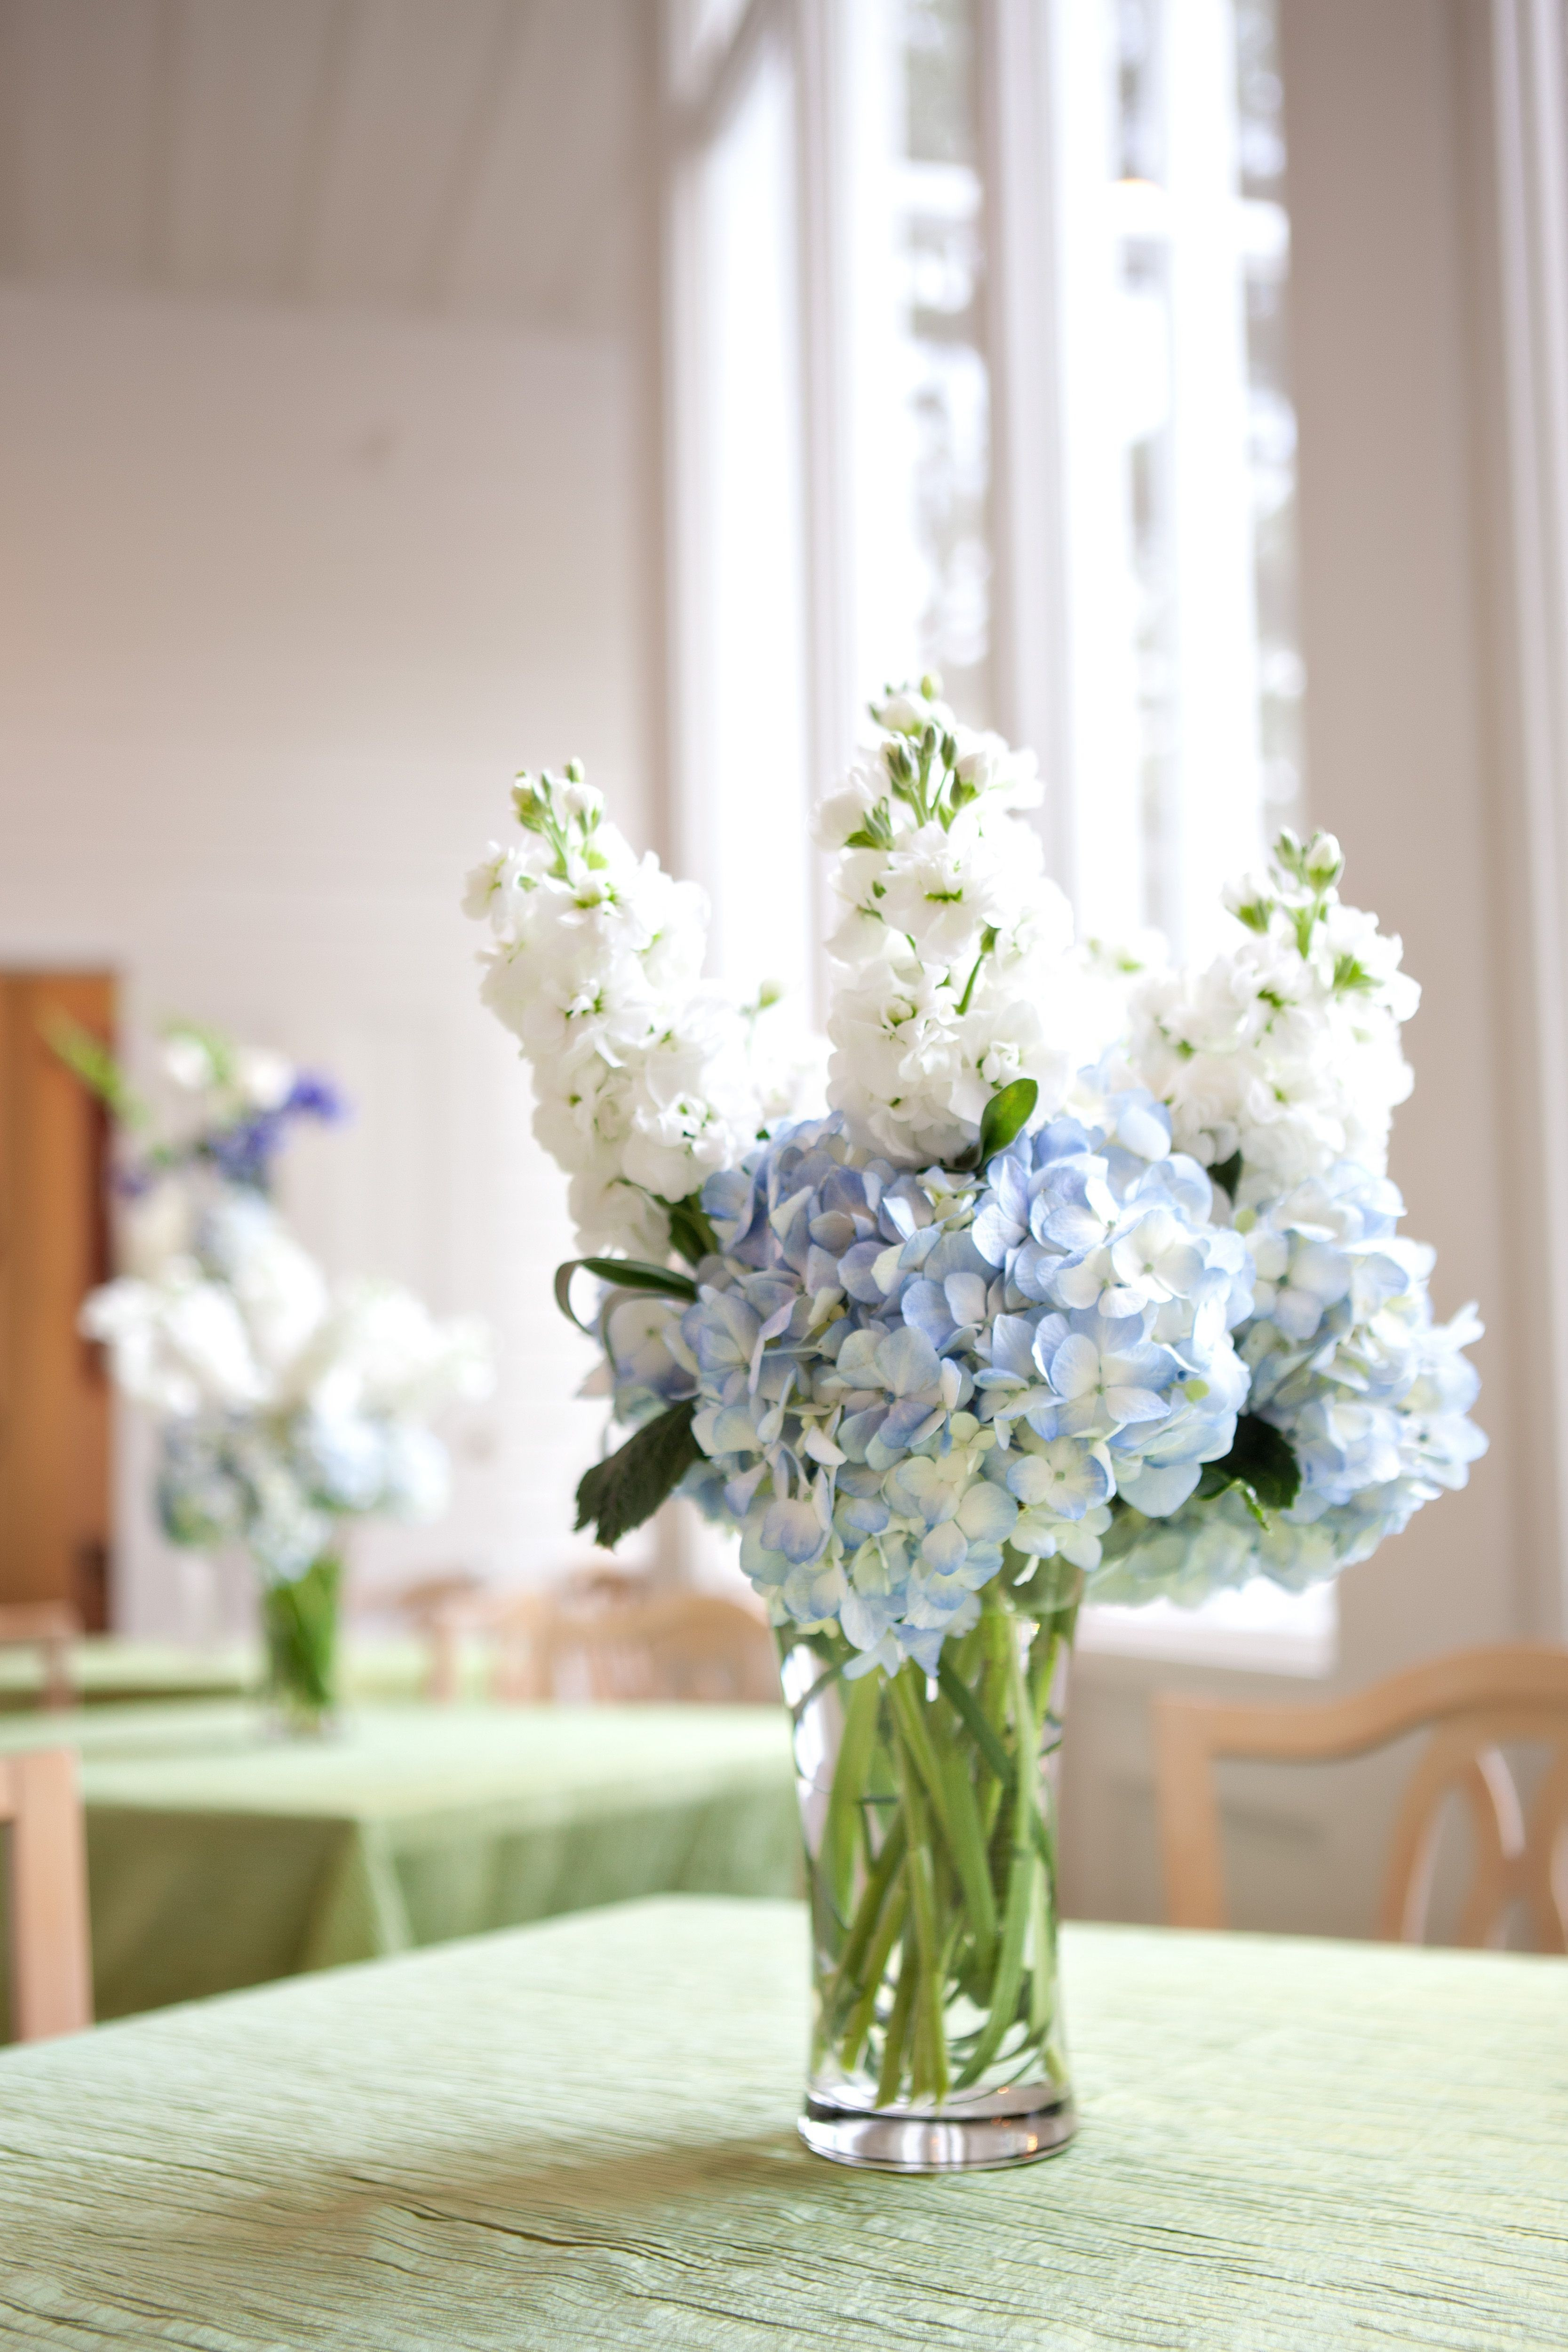 21 Awesome Eiffel tower Vase Flower Holders 2024 free download eiffel tower vase flower holders of hydrangea decorations wedding unique cool wedding ideas as for h pertaining to hydrangea decorations wedding fresh blue hydrangea centerpiece hydrangea we